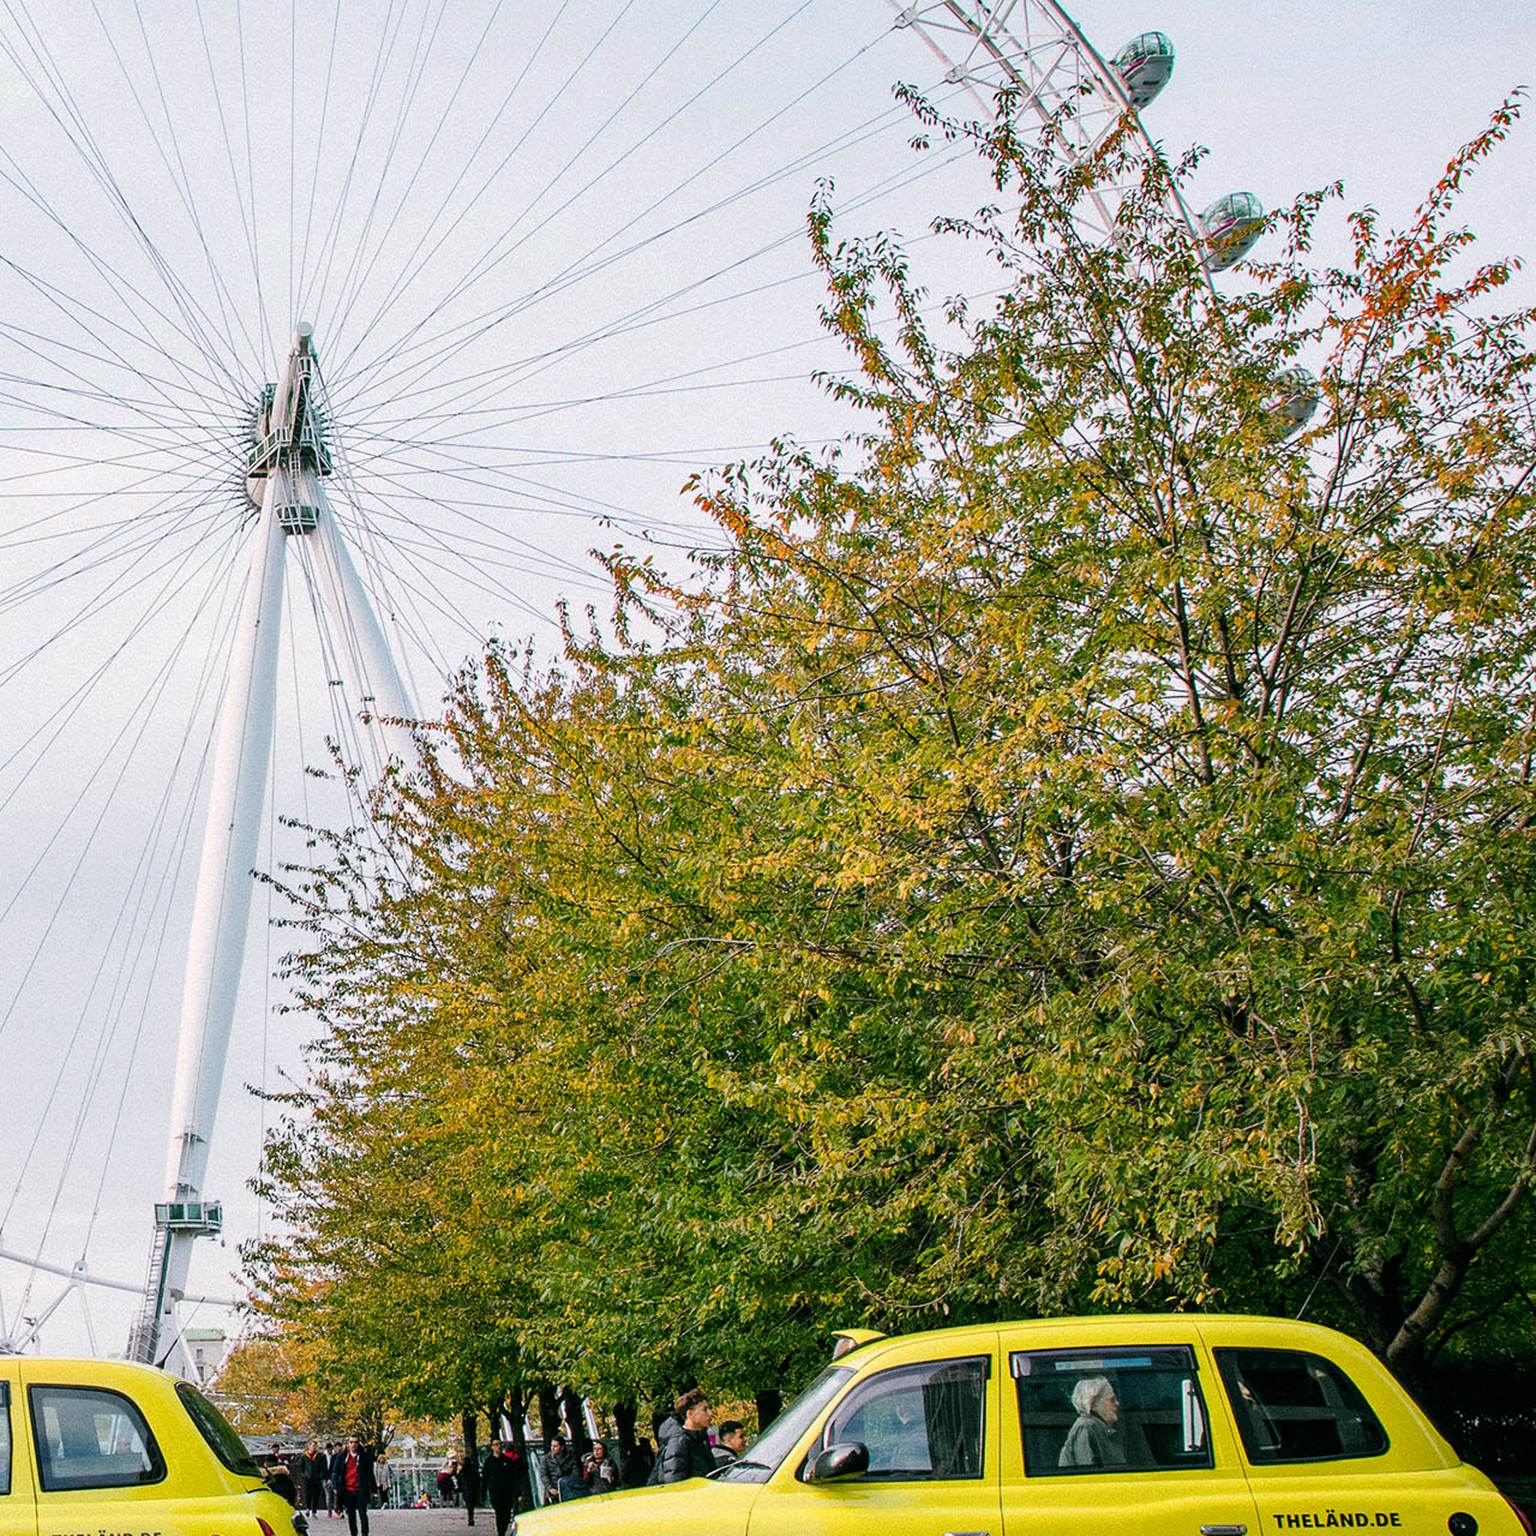 Neon yellow cabs with "LÄND" lettering are standing in front of the London Eye in England.